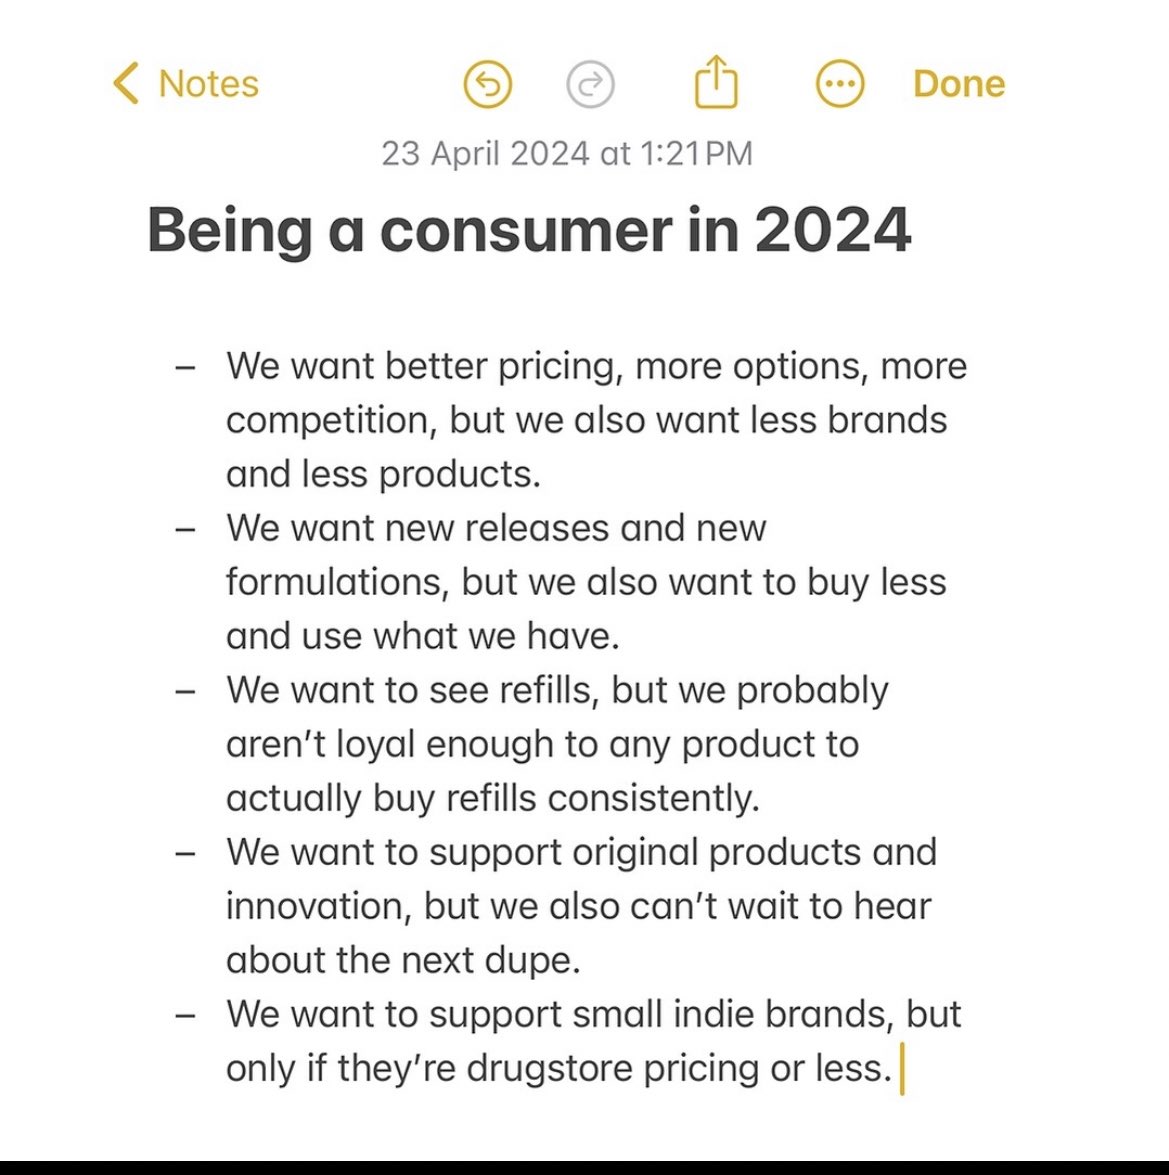 Saw this post on Instagram. Makes perfect sense, or does it? 

Well, you don’t know, but guess what, neither do they :)

#brands #startups #consumer #buildinginpublic #businesses #businesstrends